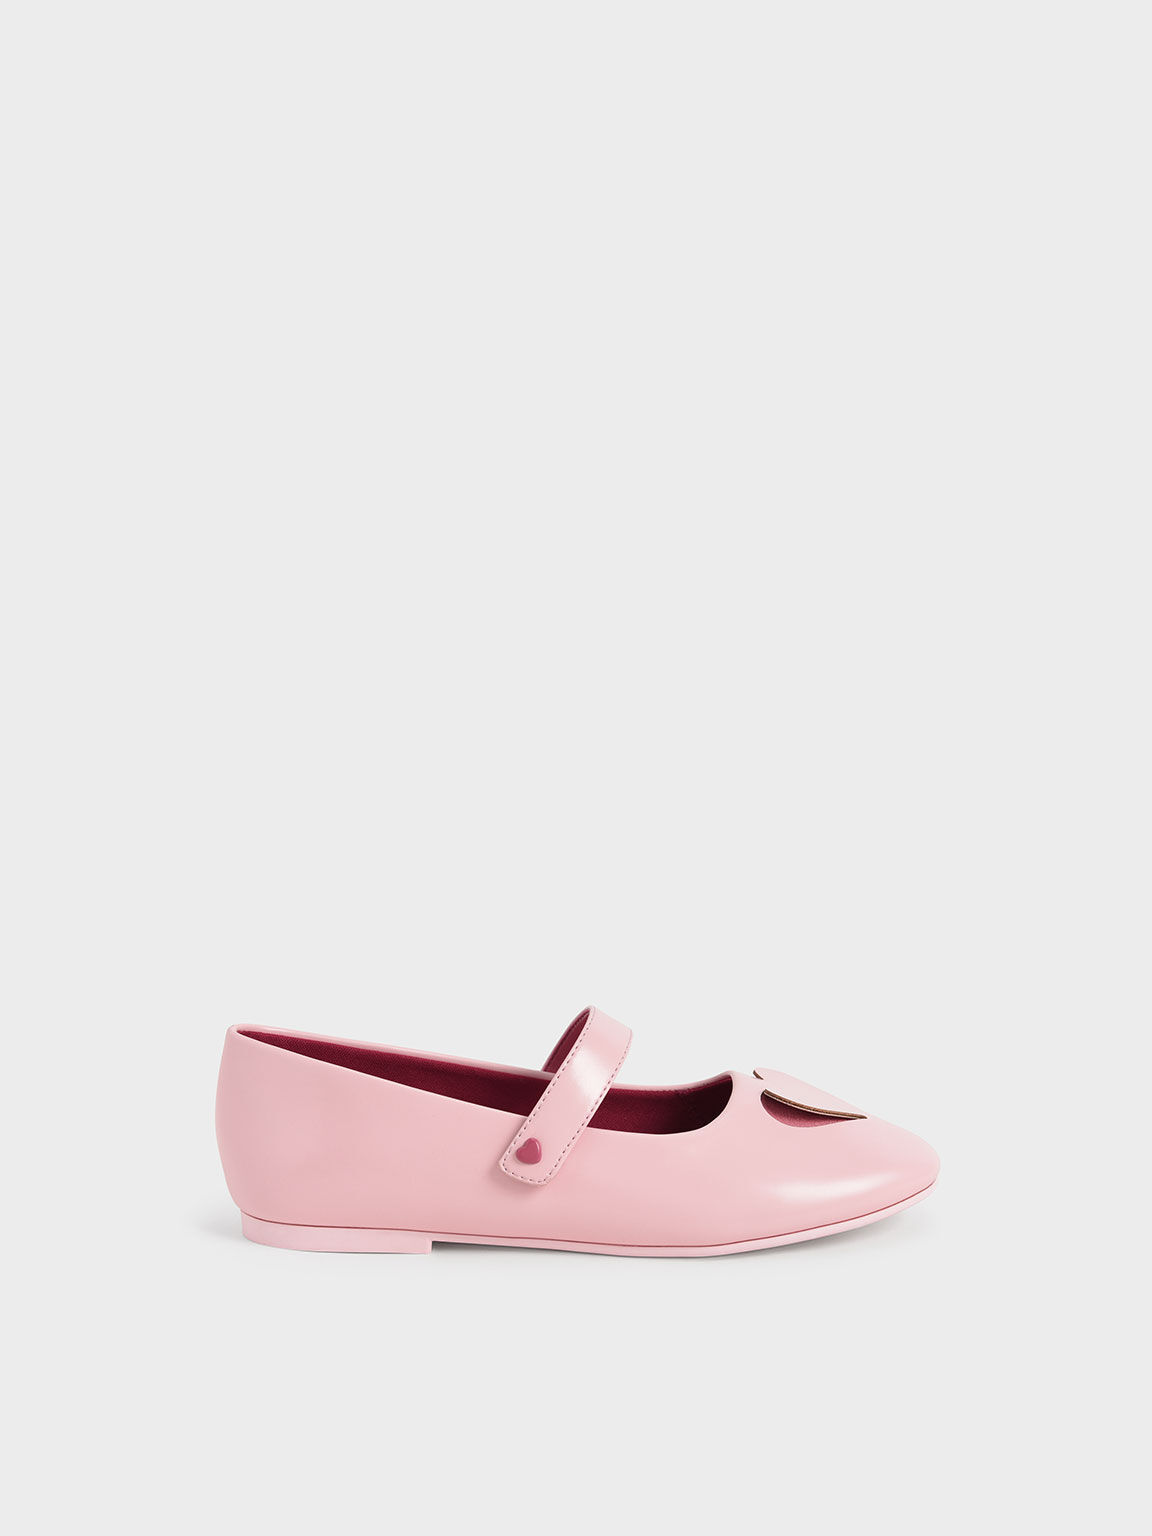 Girls' Heart Cut-Out Mary Janes, Pink, hi-res